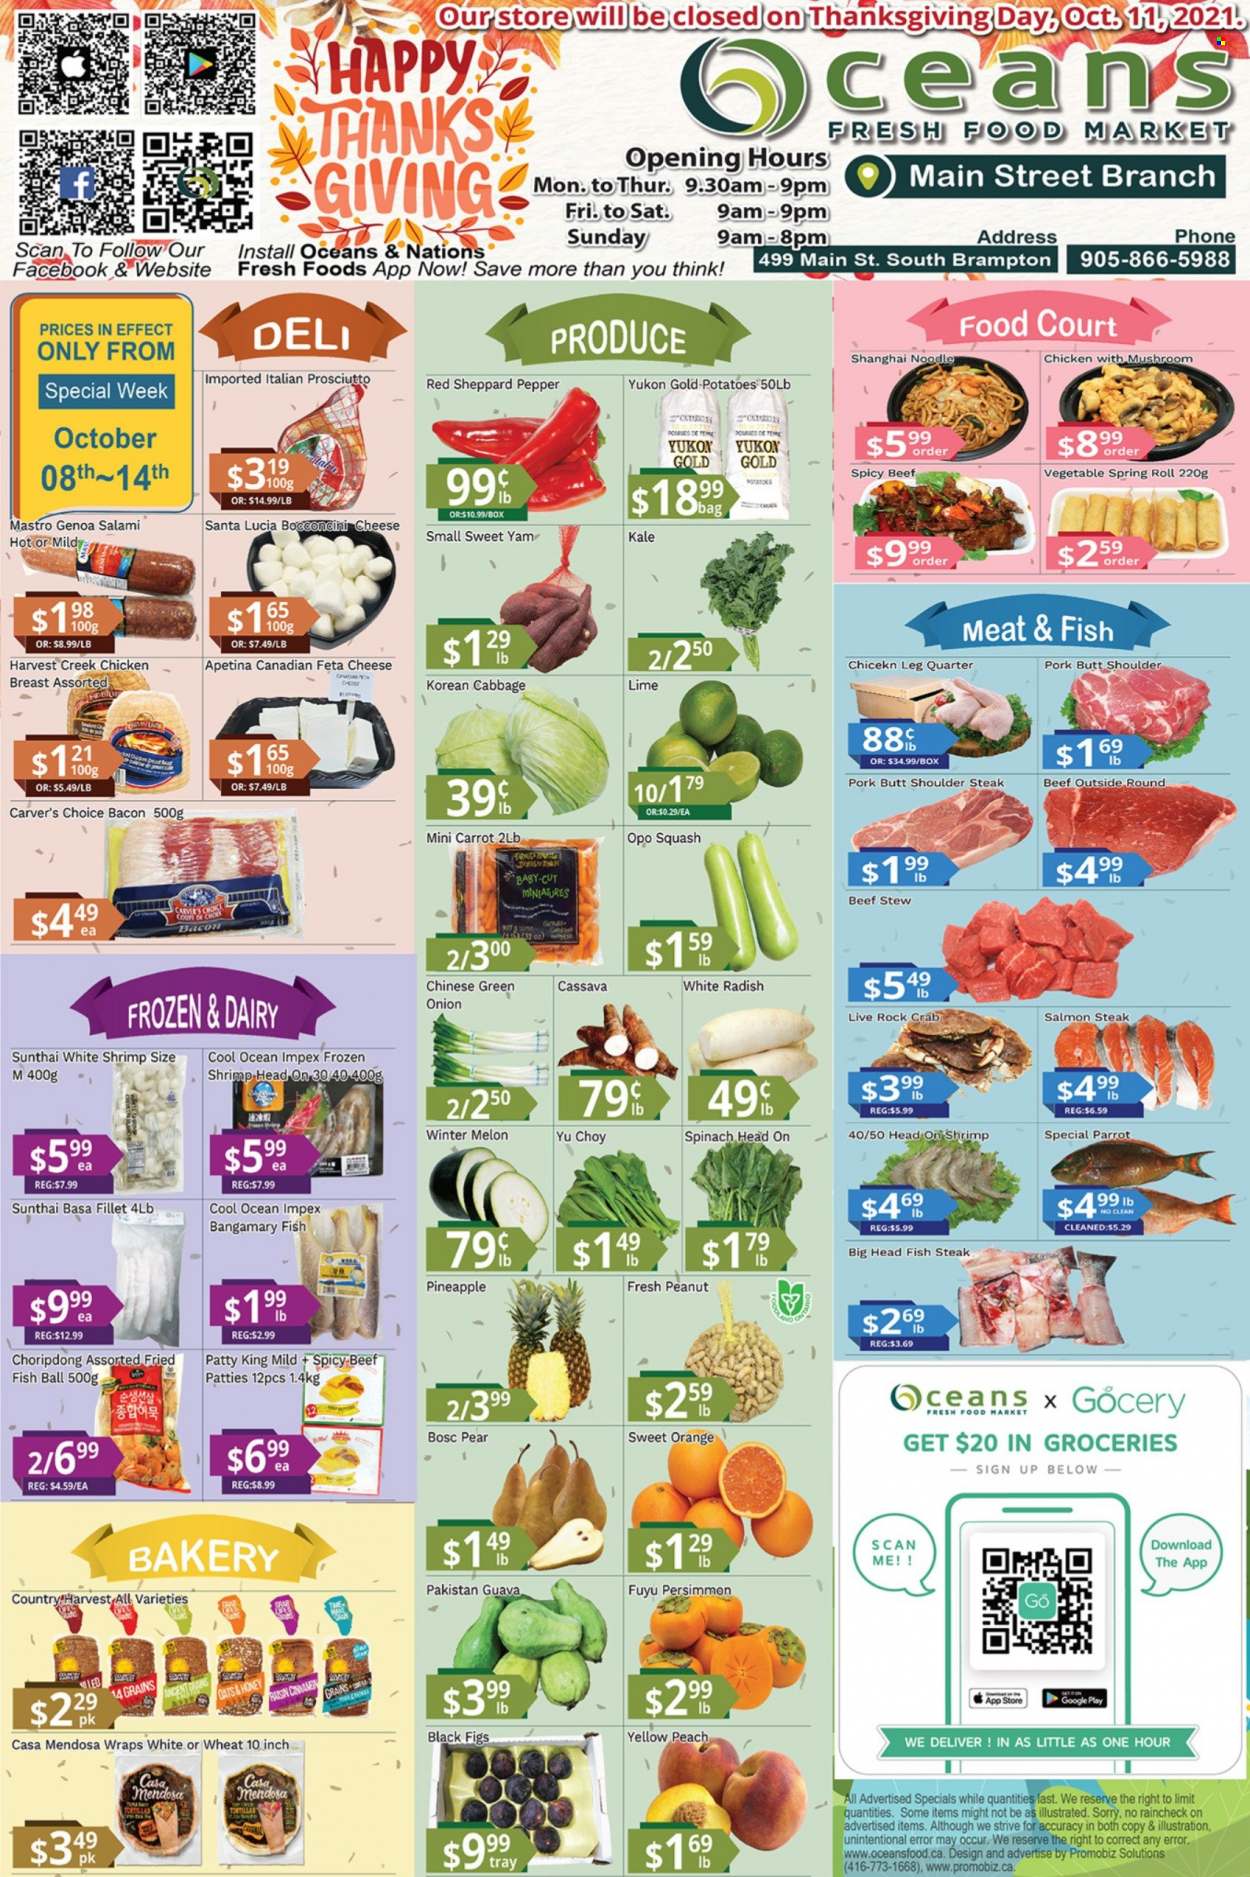 thumbnail - Oceans Flyer - October 08, 2021 - October 14, 2021 - Sales products - tortillas, wraps, cabbage, radishes, spinach, kale, potatoes, onion, white radish, cassava, figs, guava, pineapple, pears, persimmons, melons, salmon, crab, shrimps, fish steak, fried fish, noodles, bacon, salami, prosciutto, bocconcini, cheese, feta, Country Harvest, Santa, honey, chicken breasts, chicken, steak, oranges. Page 1.